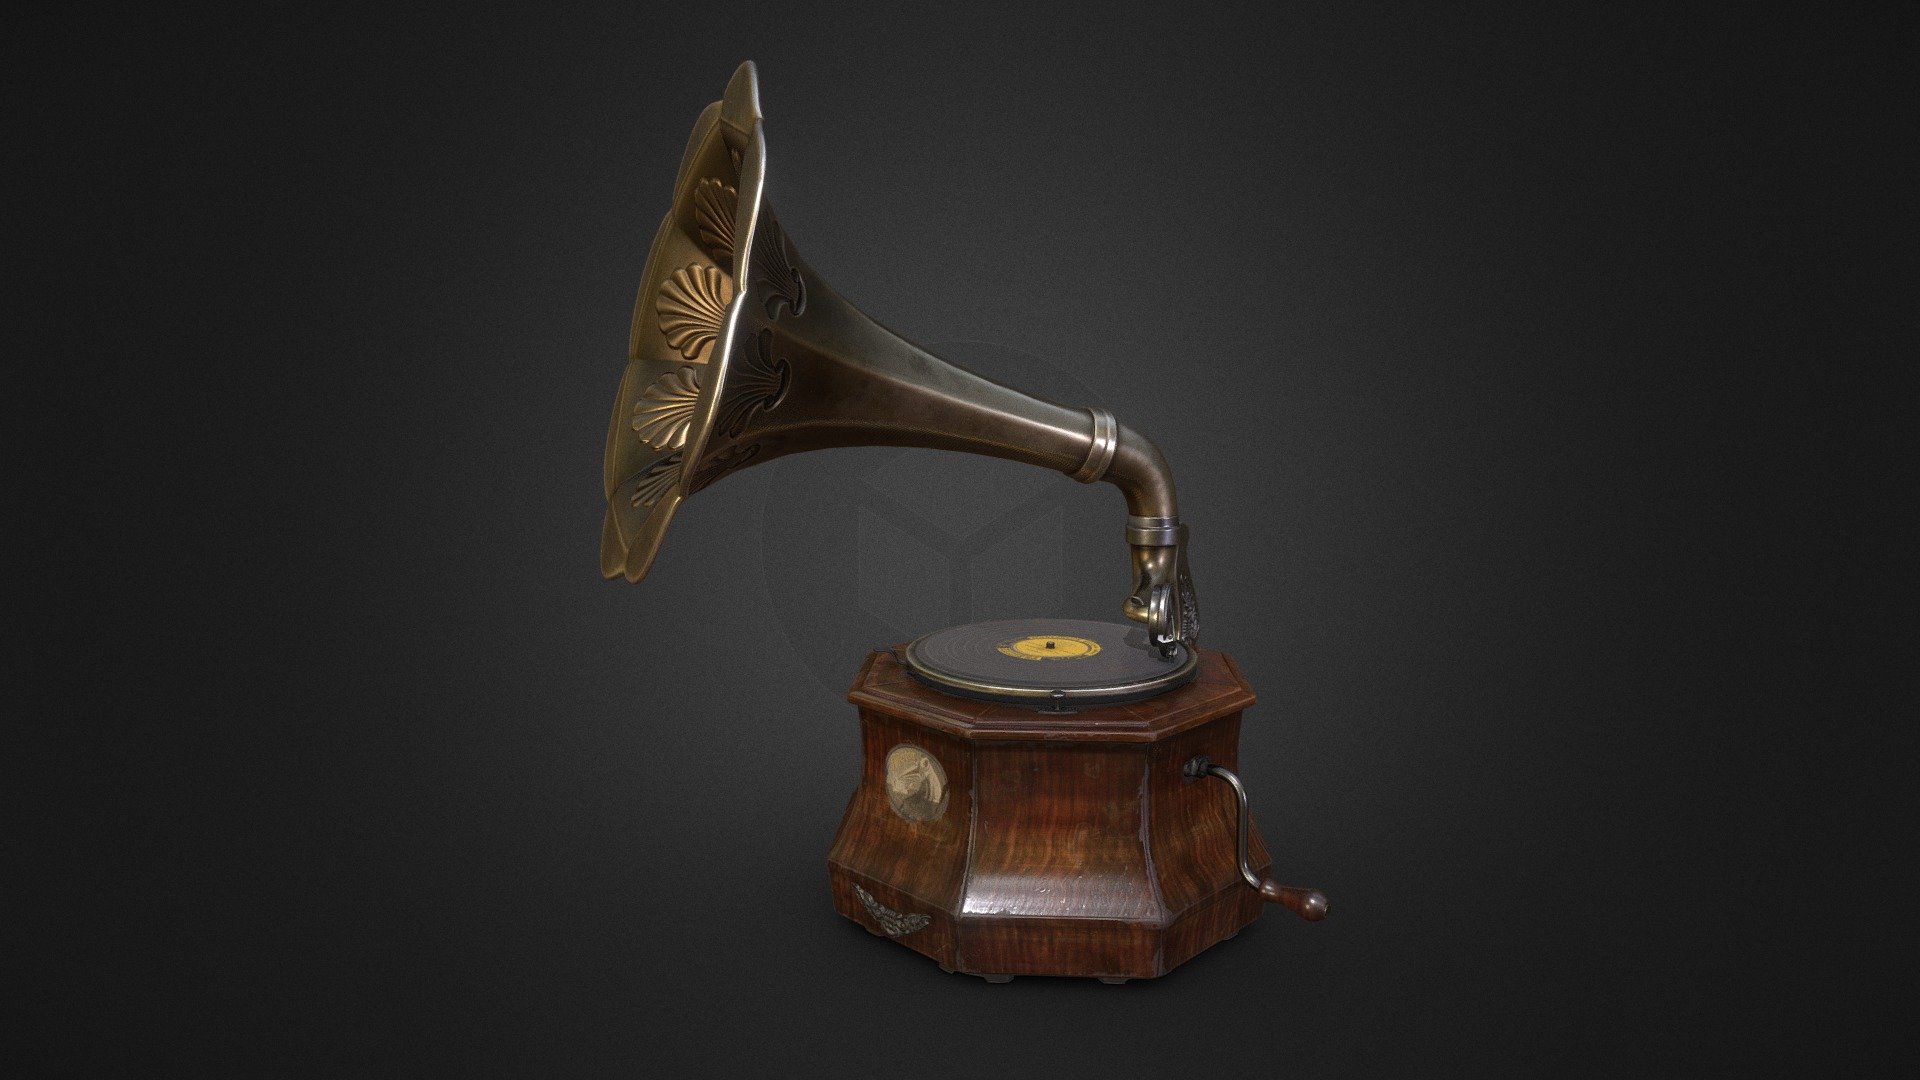 Antique Gramophone low poly model.

4k textures. Total polycount 12959 tris.

Model created on Blender and ZBrush. Textured with Substance Painter 3d model